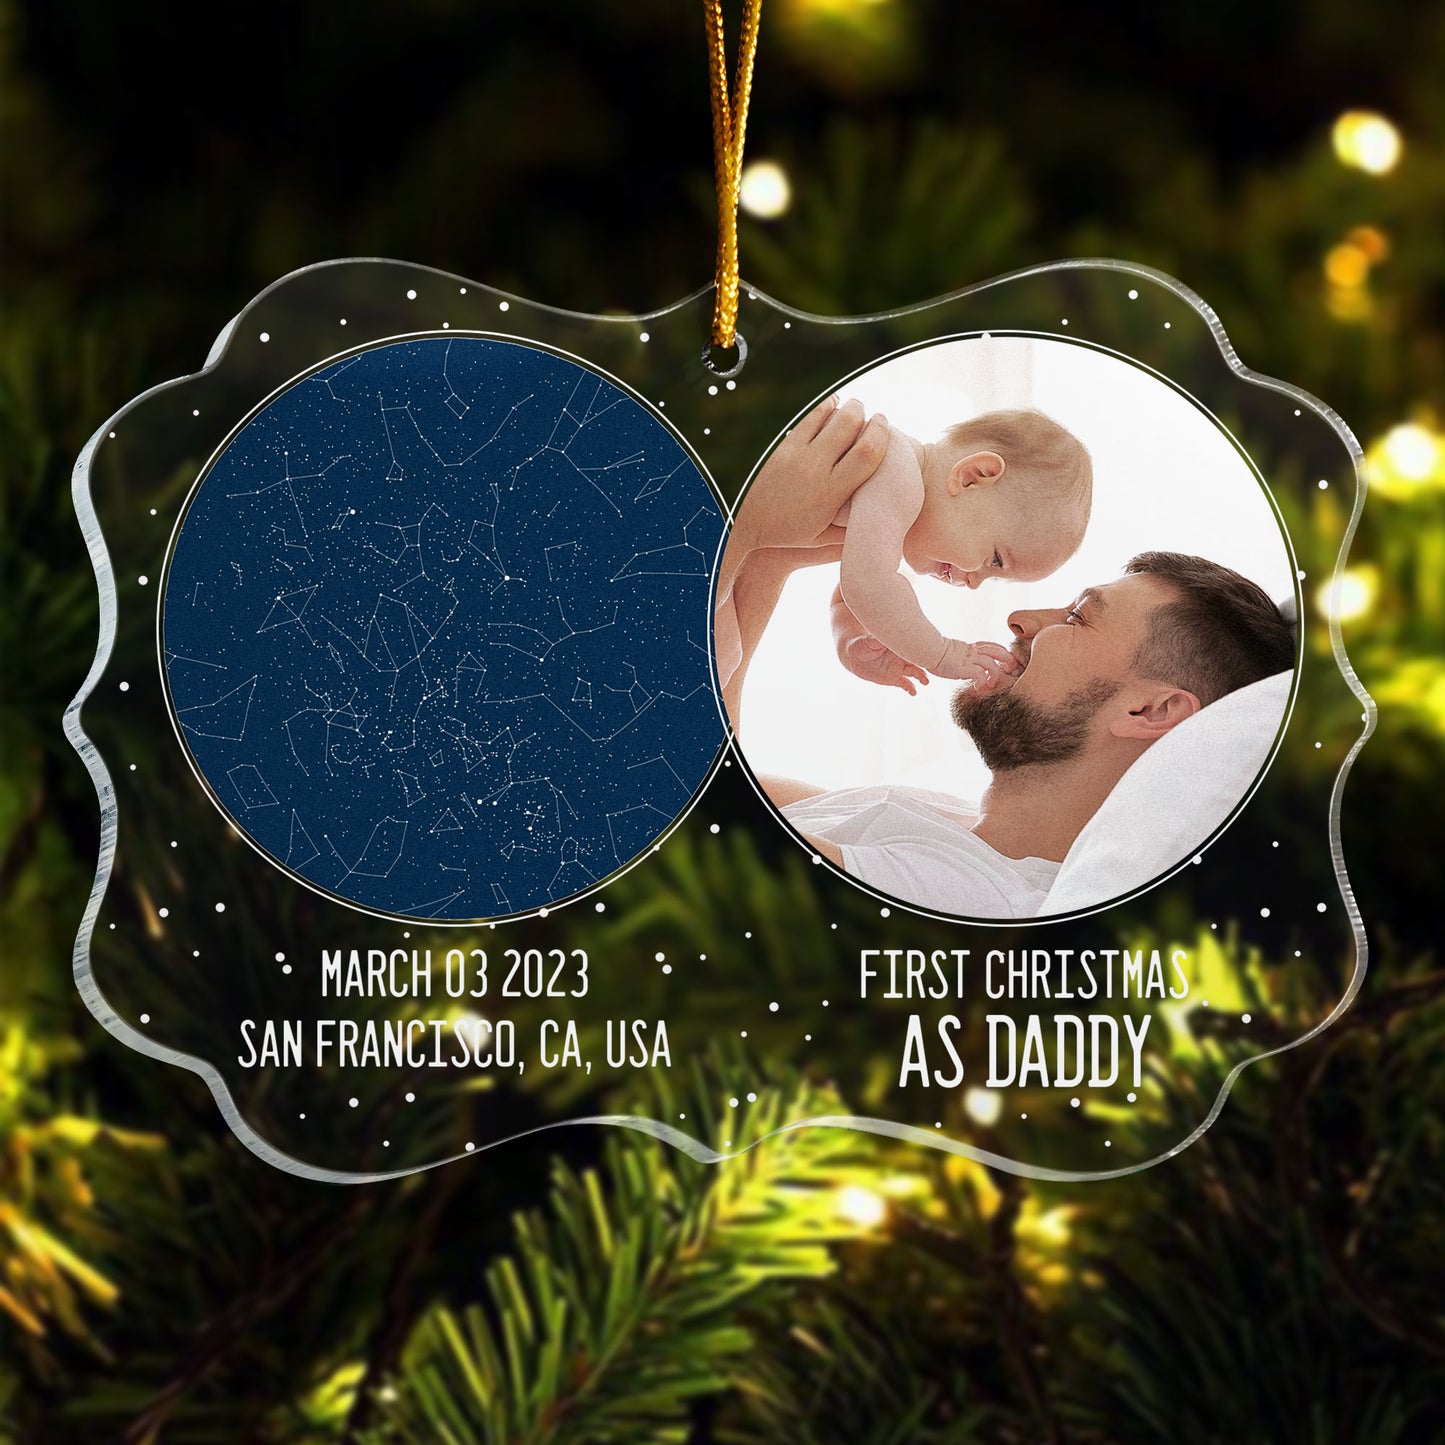 First Christmas As Daddy - Personalized Photo Acrylic Ornament